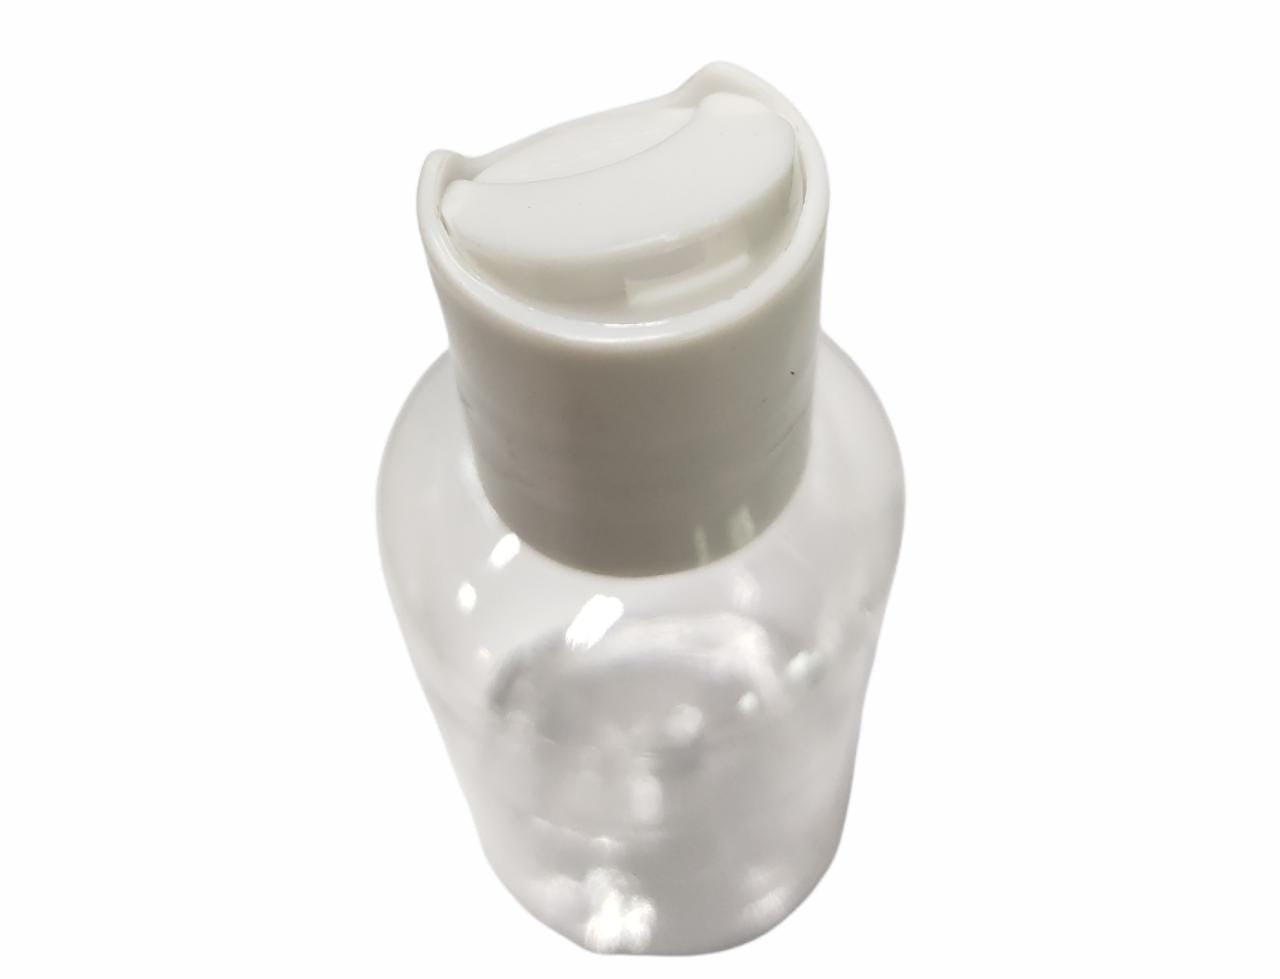 Plastic Bottle 50ml Clear with Lotion Lid